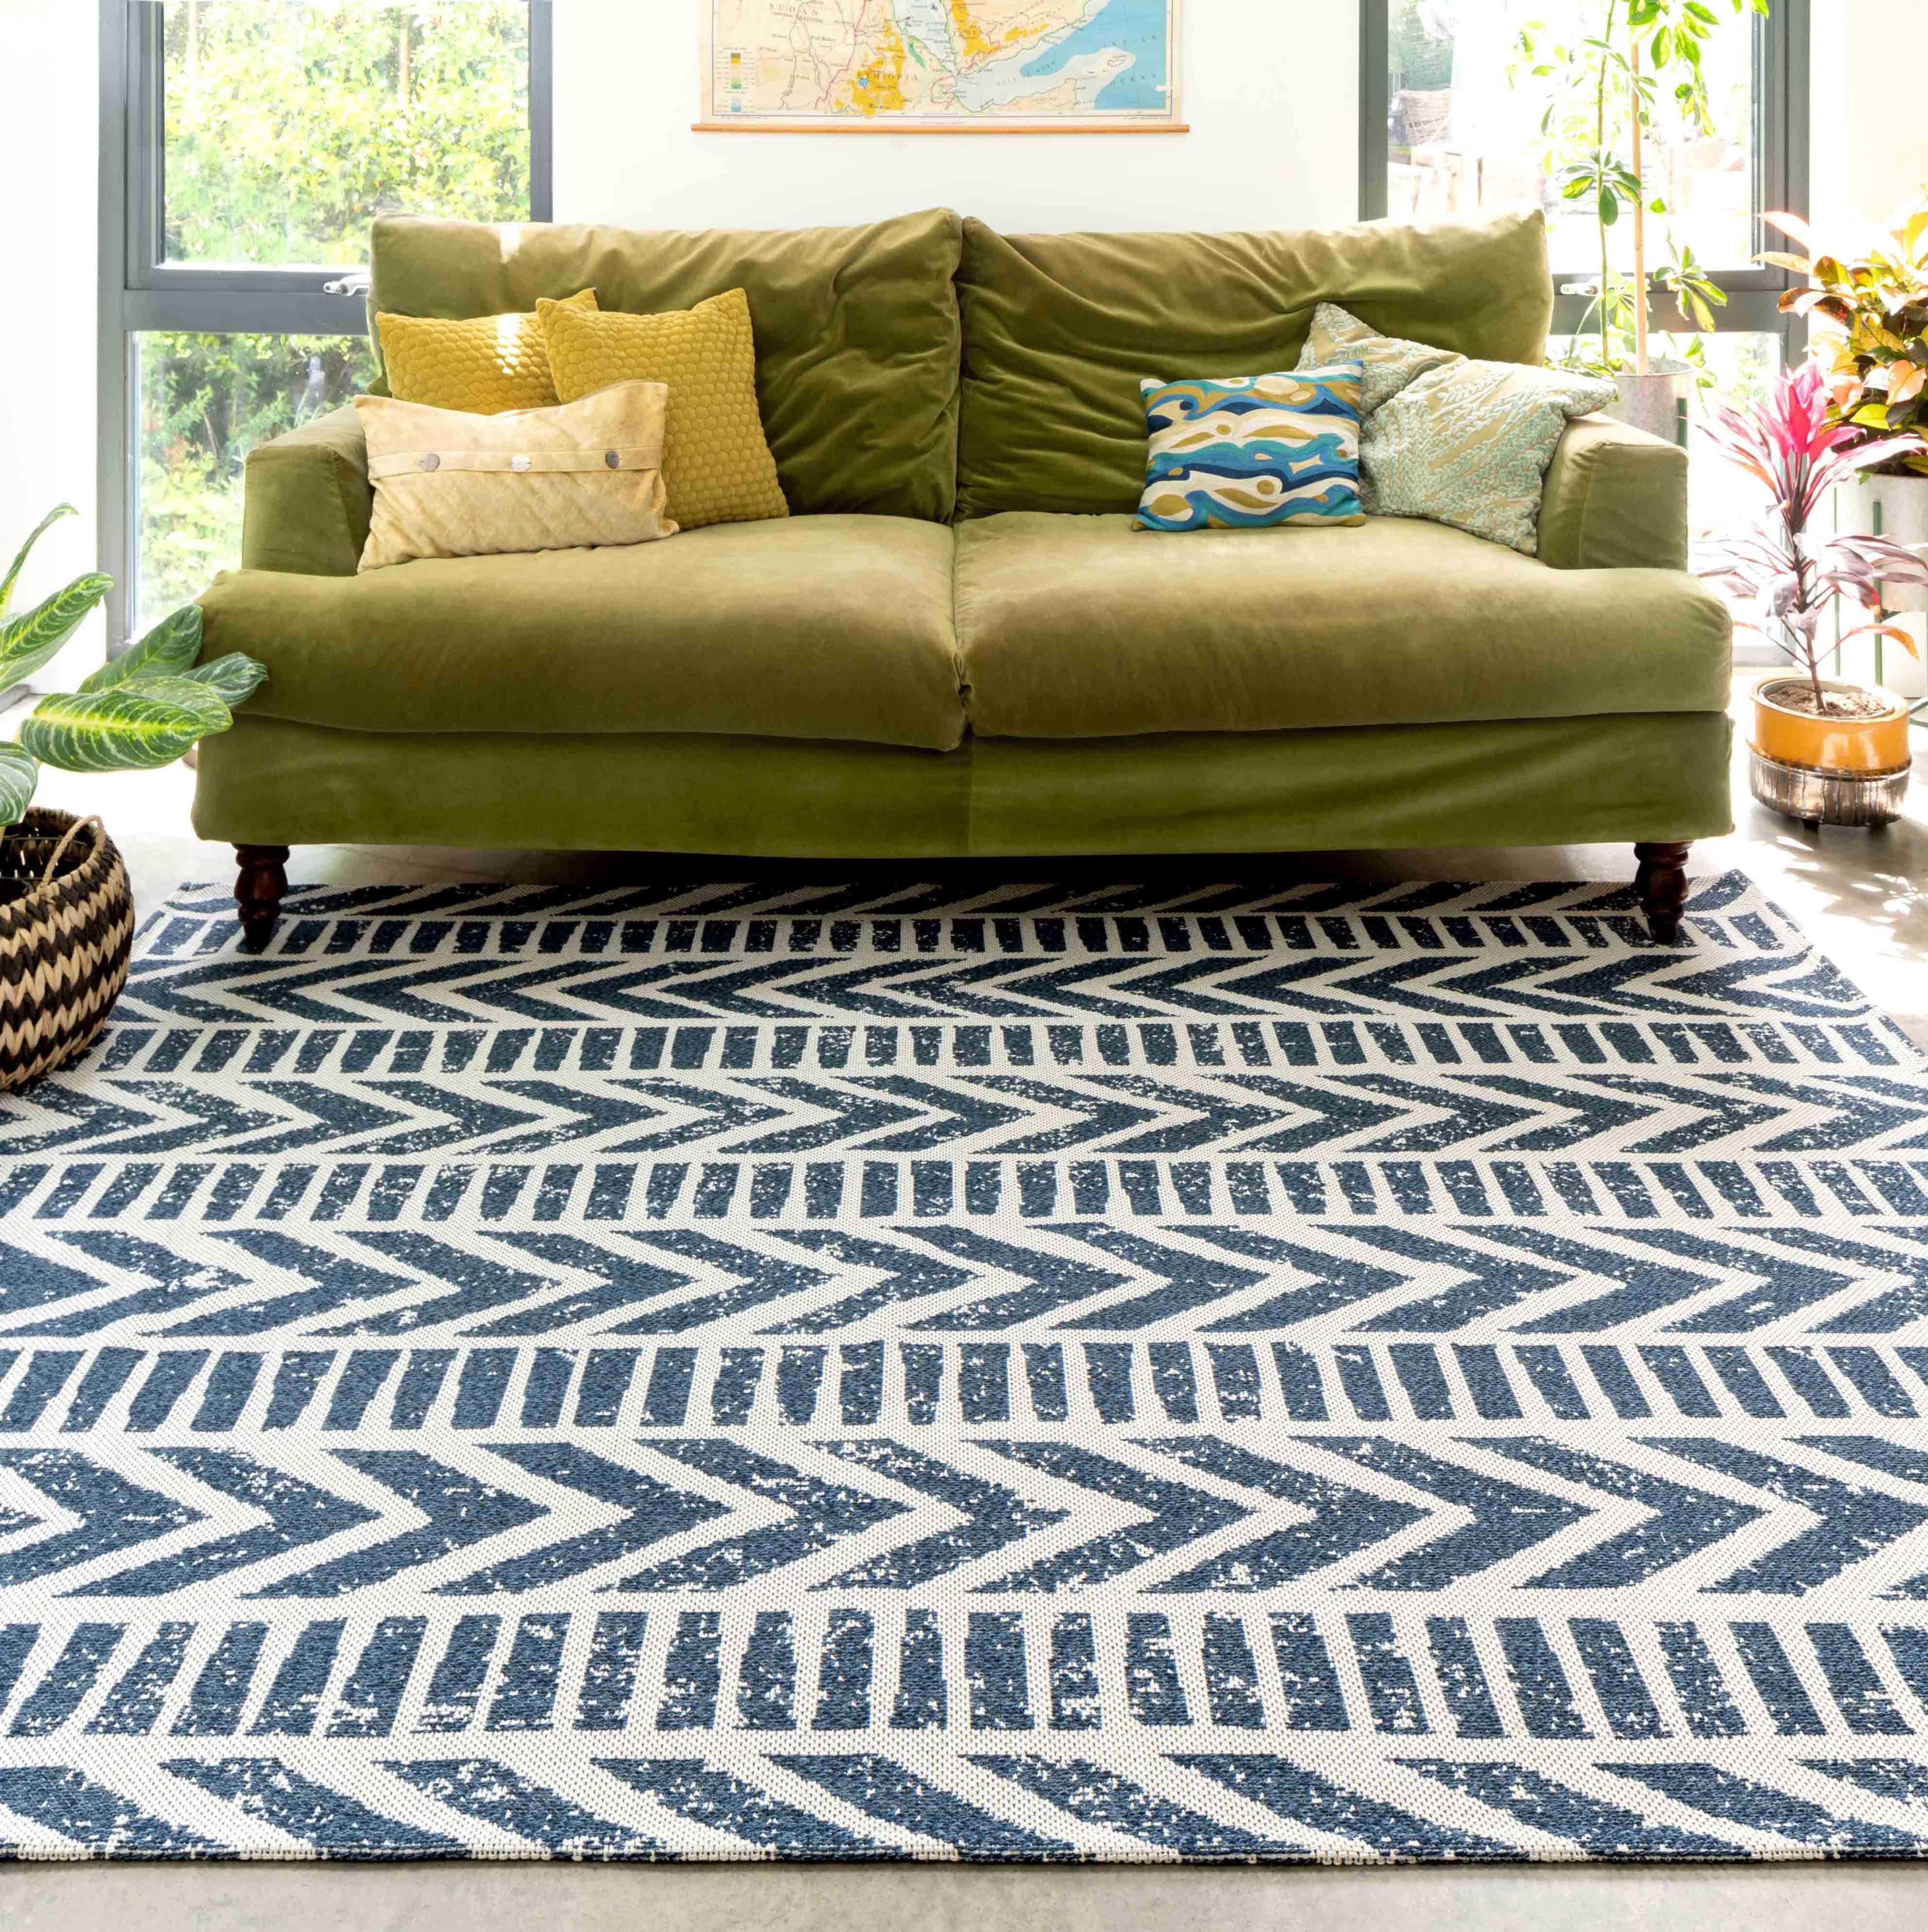 Chevron Striped Blue Woven Recycled Cotton Rug | Kendall | Kukoon Rugs  Europe Throughout Woven Chevron Rugs (View 6 of 15)